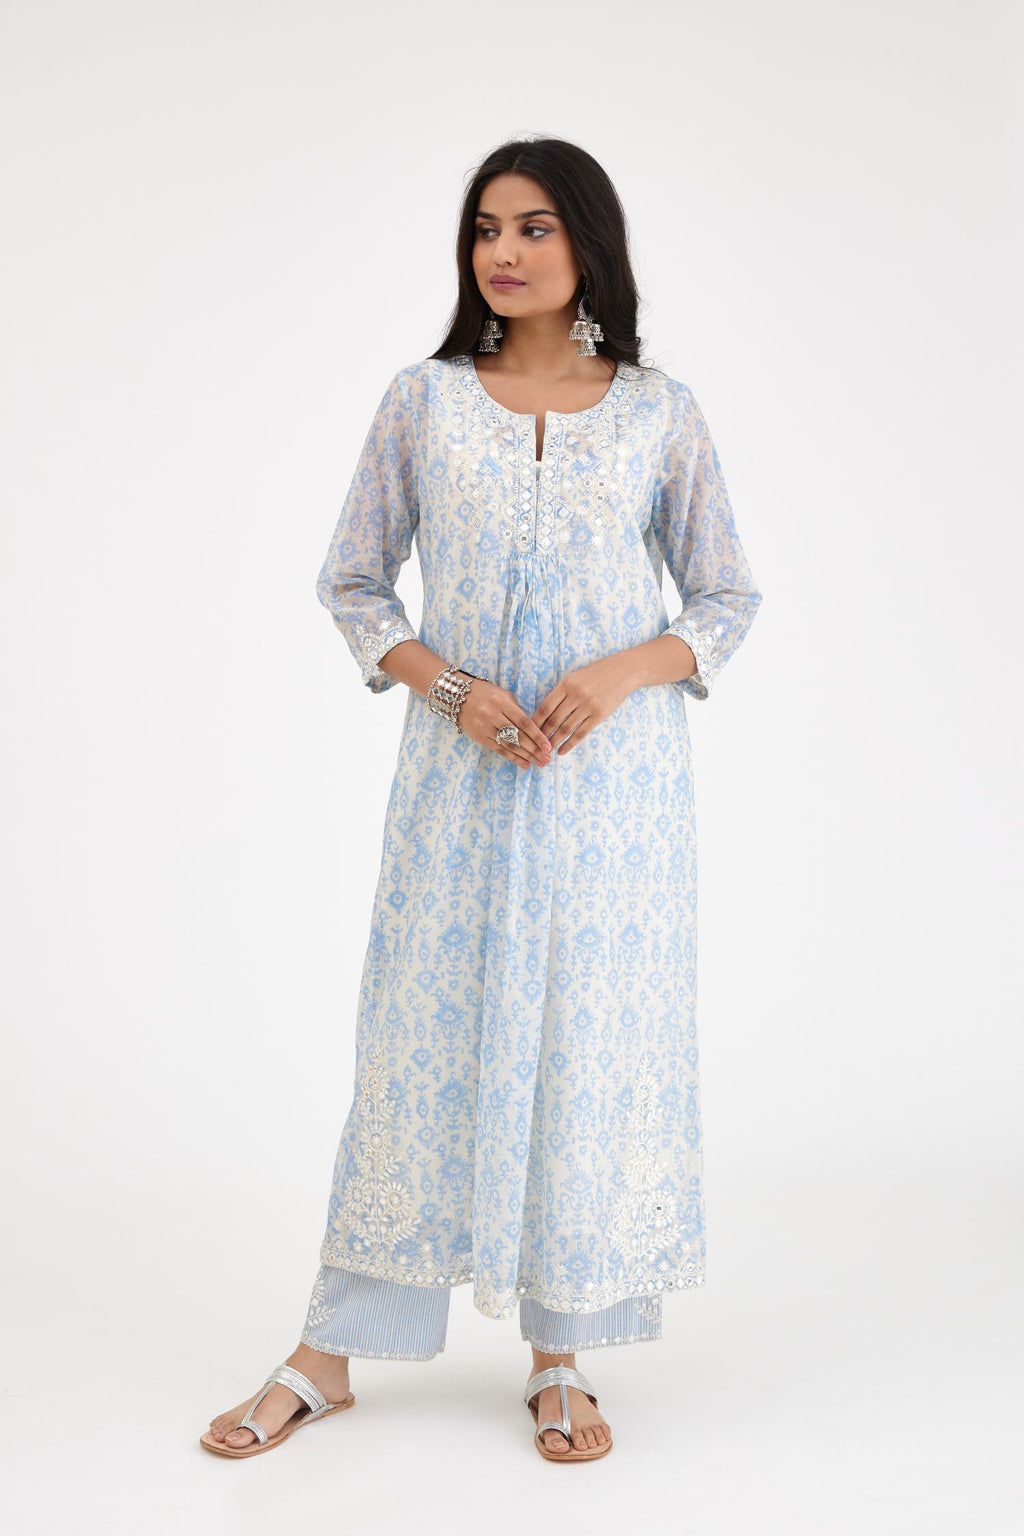 Ikat design blue and off white hand block-printed Cotton Chanderi straight long kurta set dress with off-white thread and mirror embroidery.